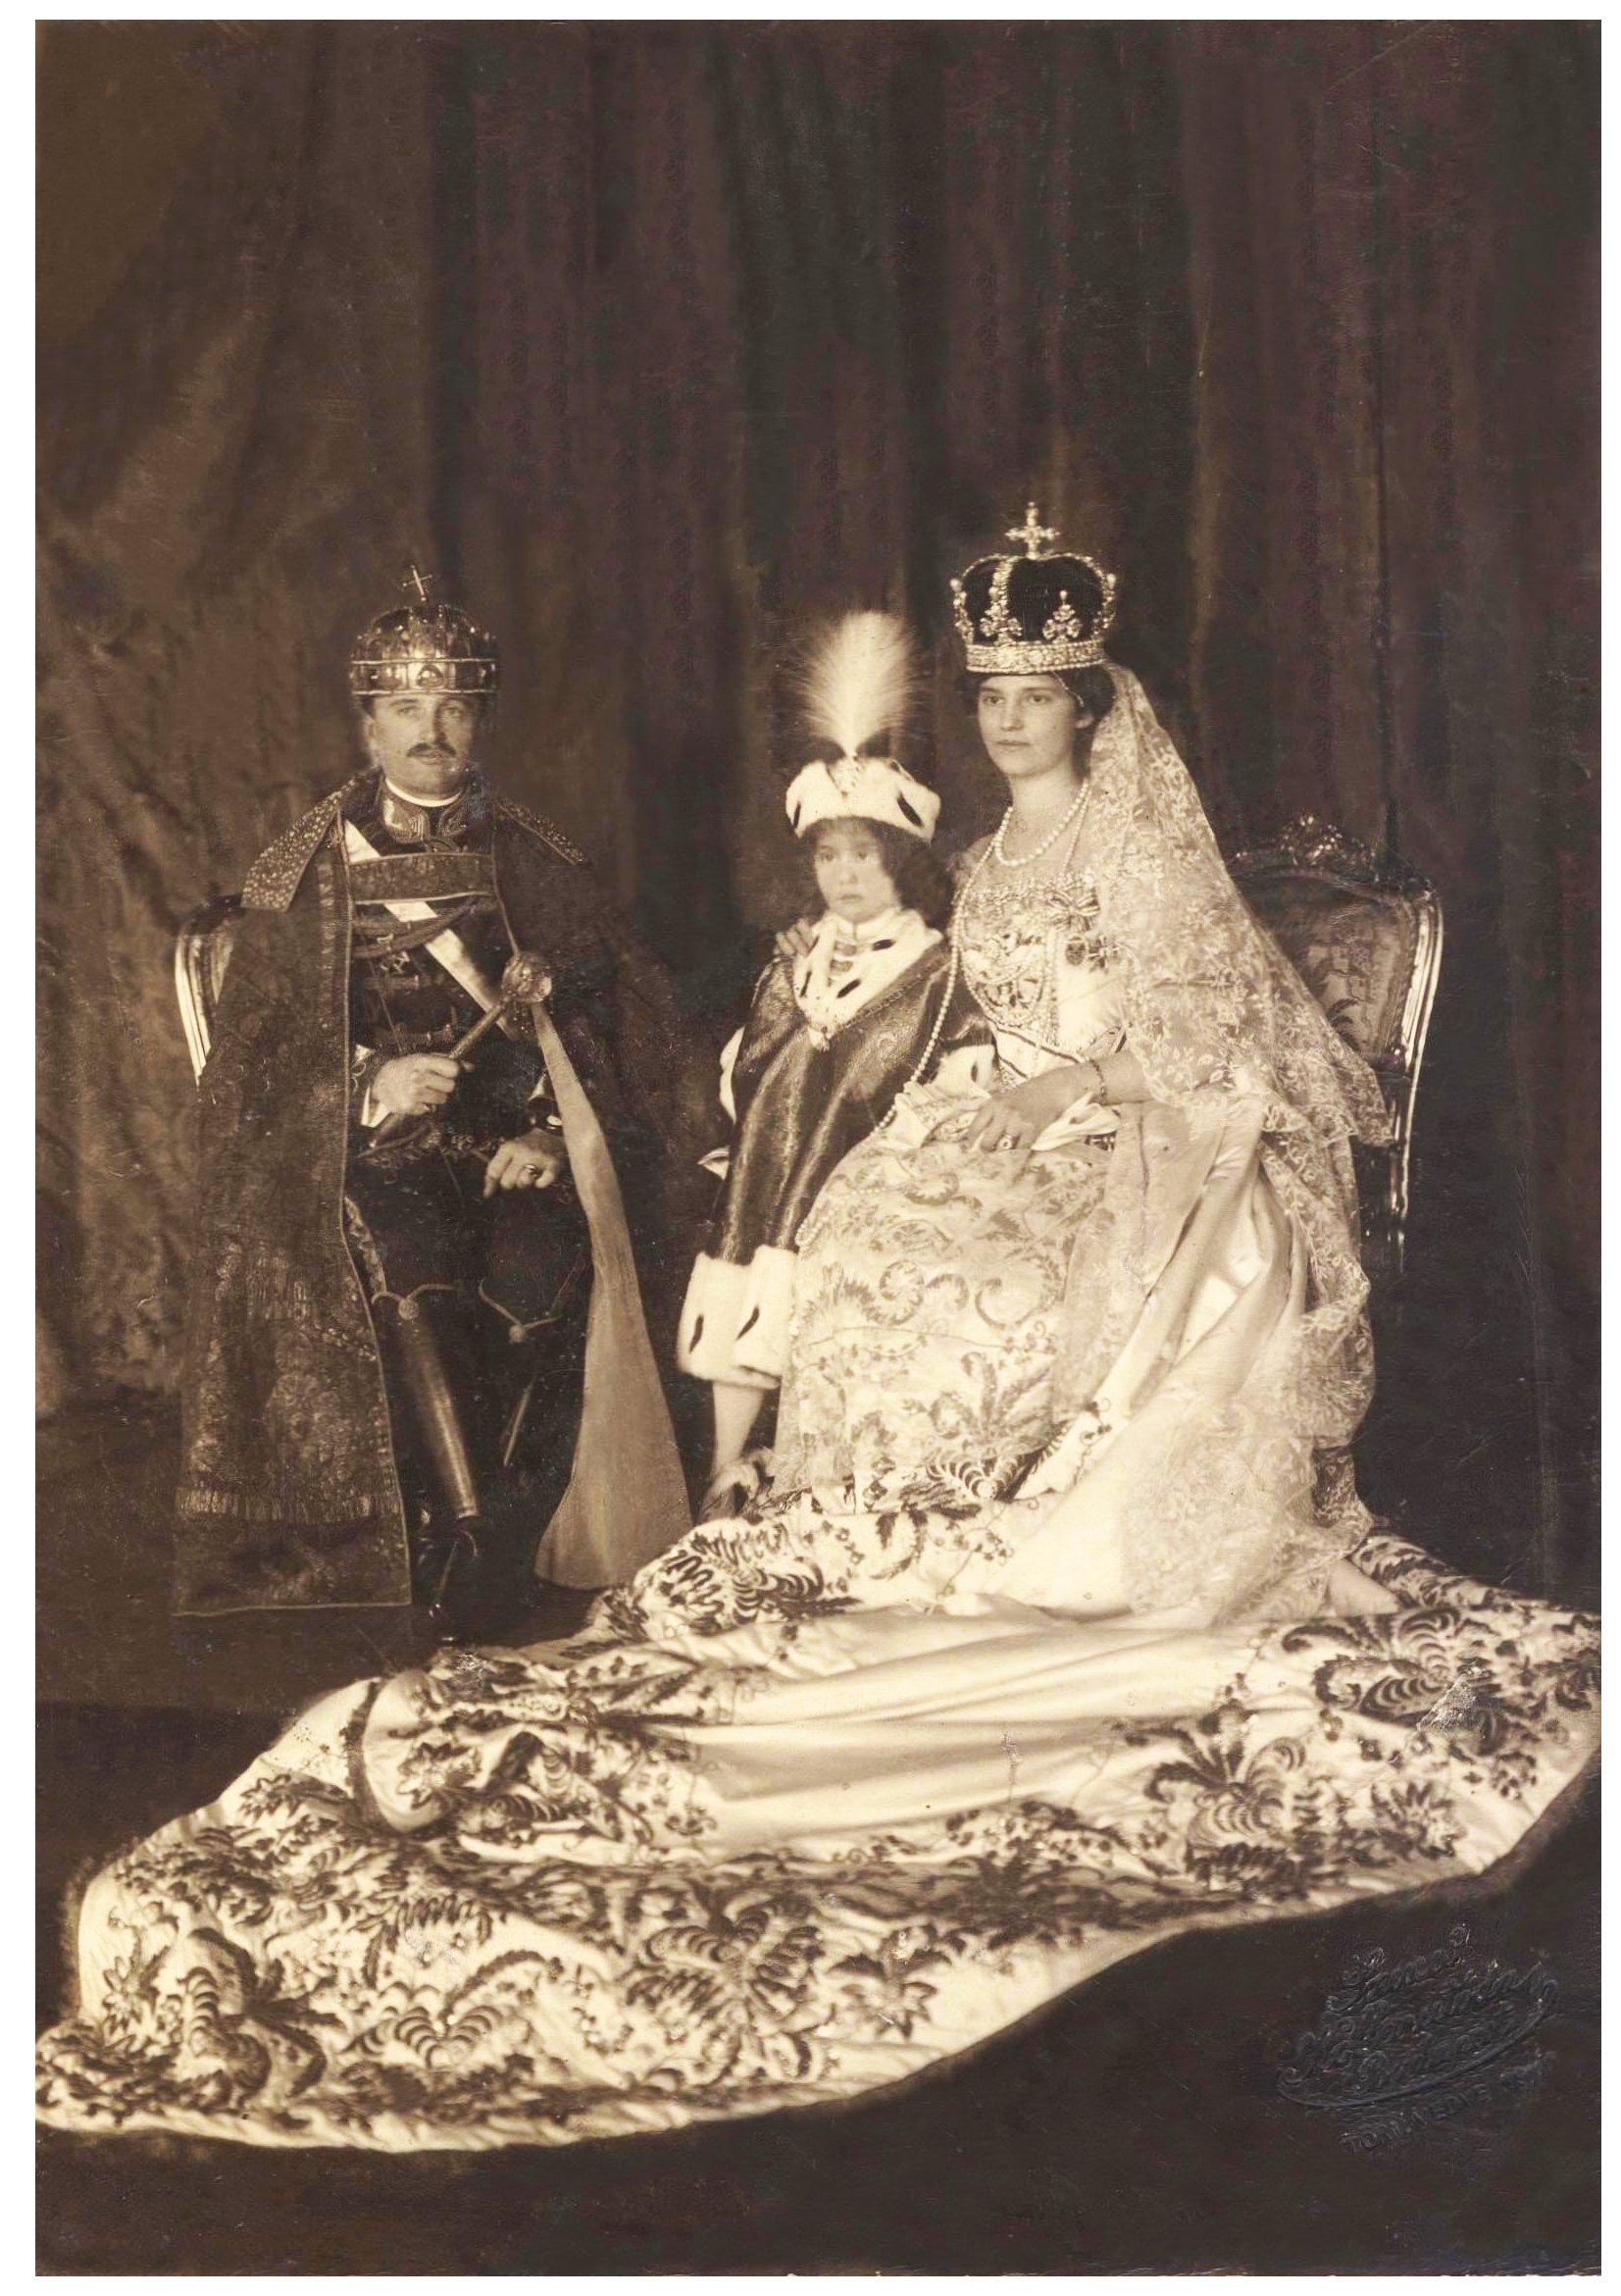 Magyar Nemzeti Levéltár, Family photo of King Charles IV of Hungary, Queen Zita and their son Otto Habsburg after the coronation (30th December 1916). Reference code: HU_MNL_OL_P_0004_543_No_0012
